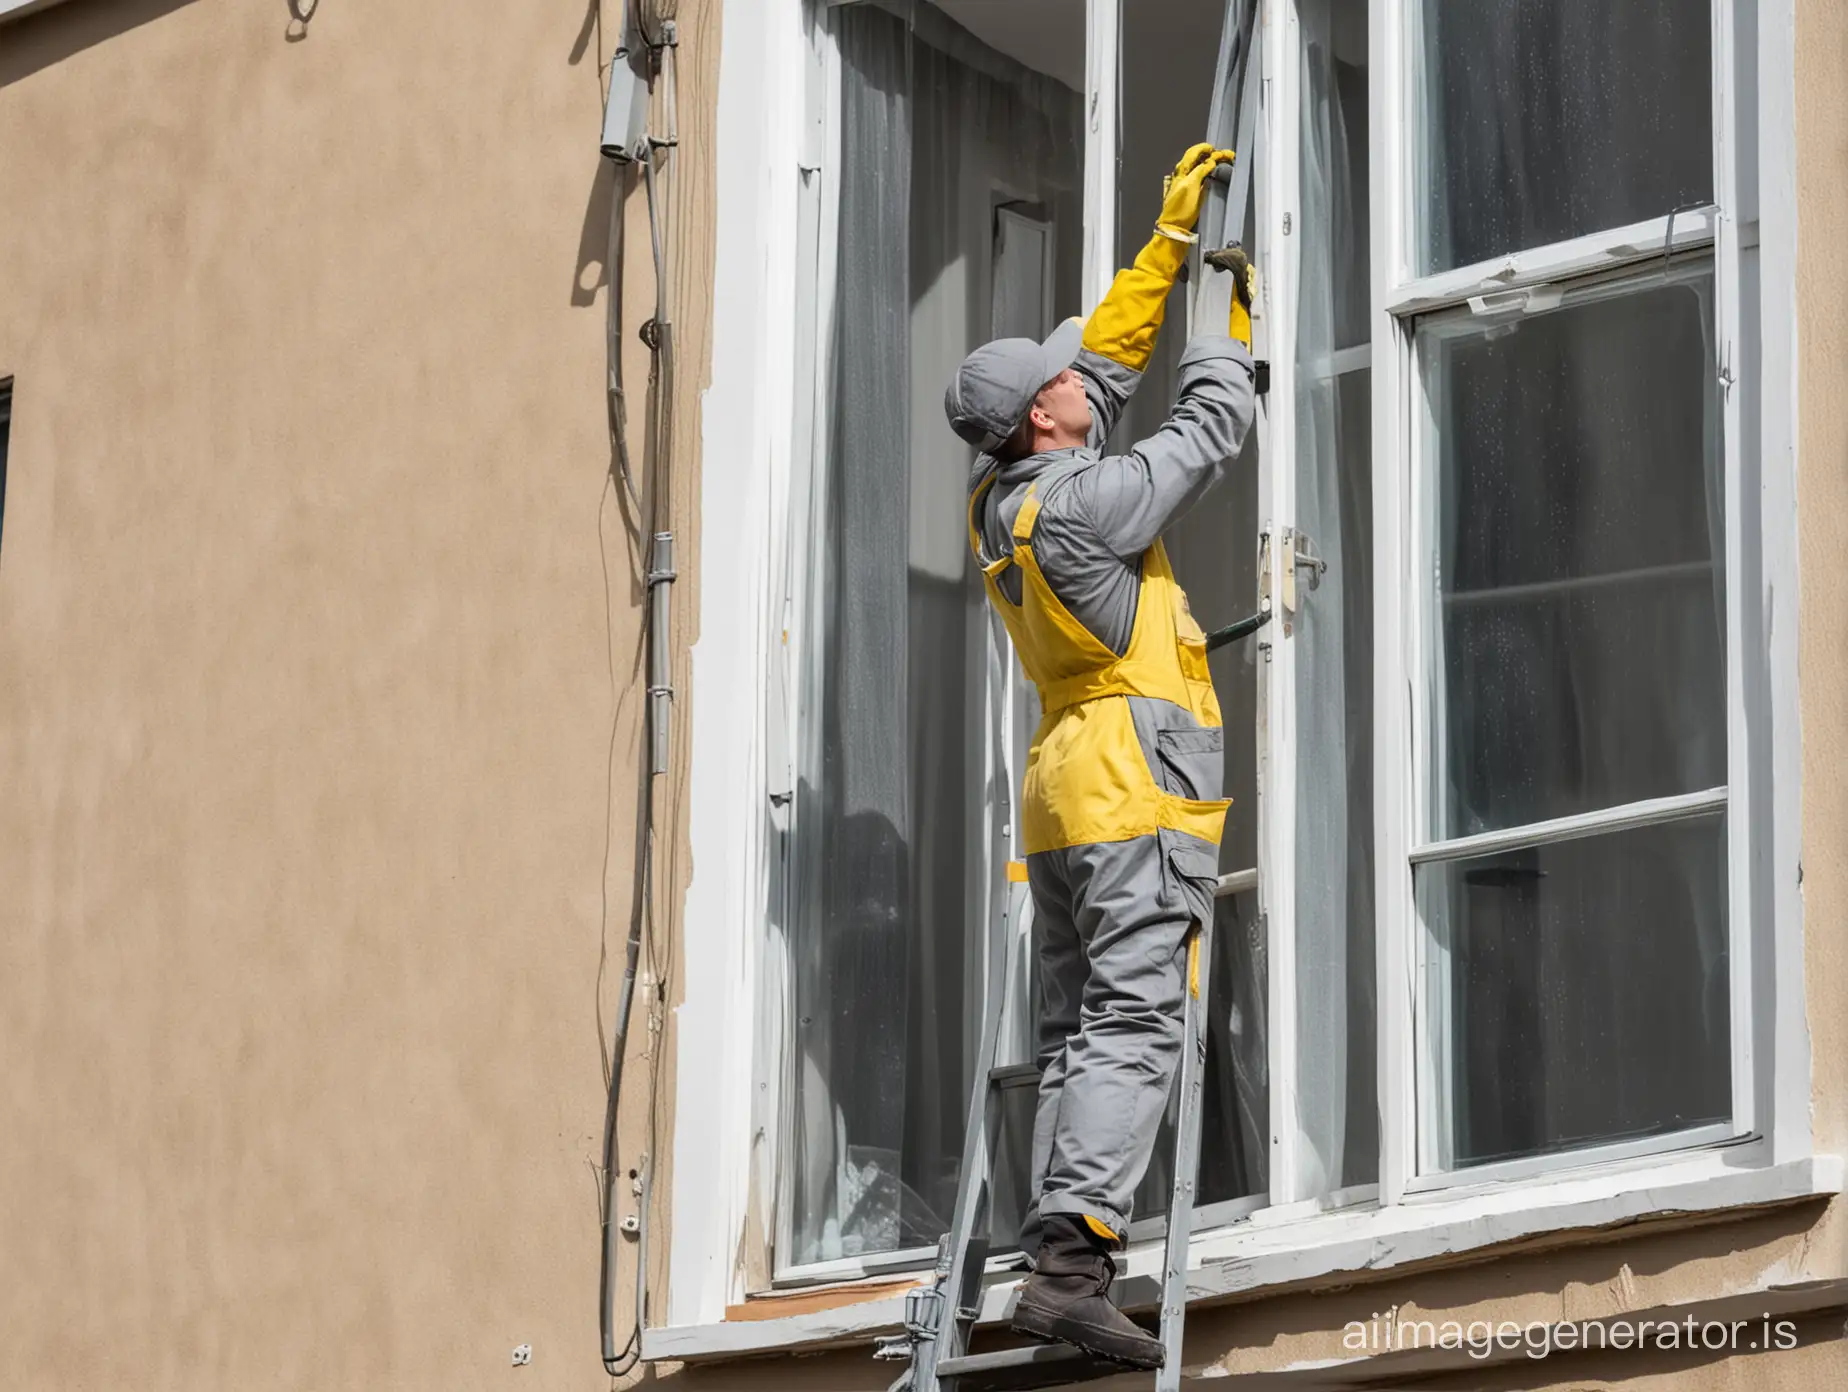 Professional-Window-Cleaner-in-Action-on-Ladder